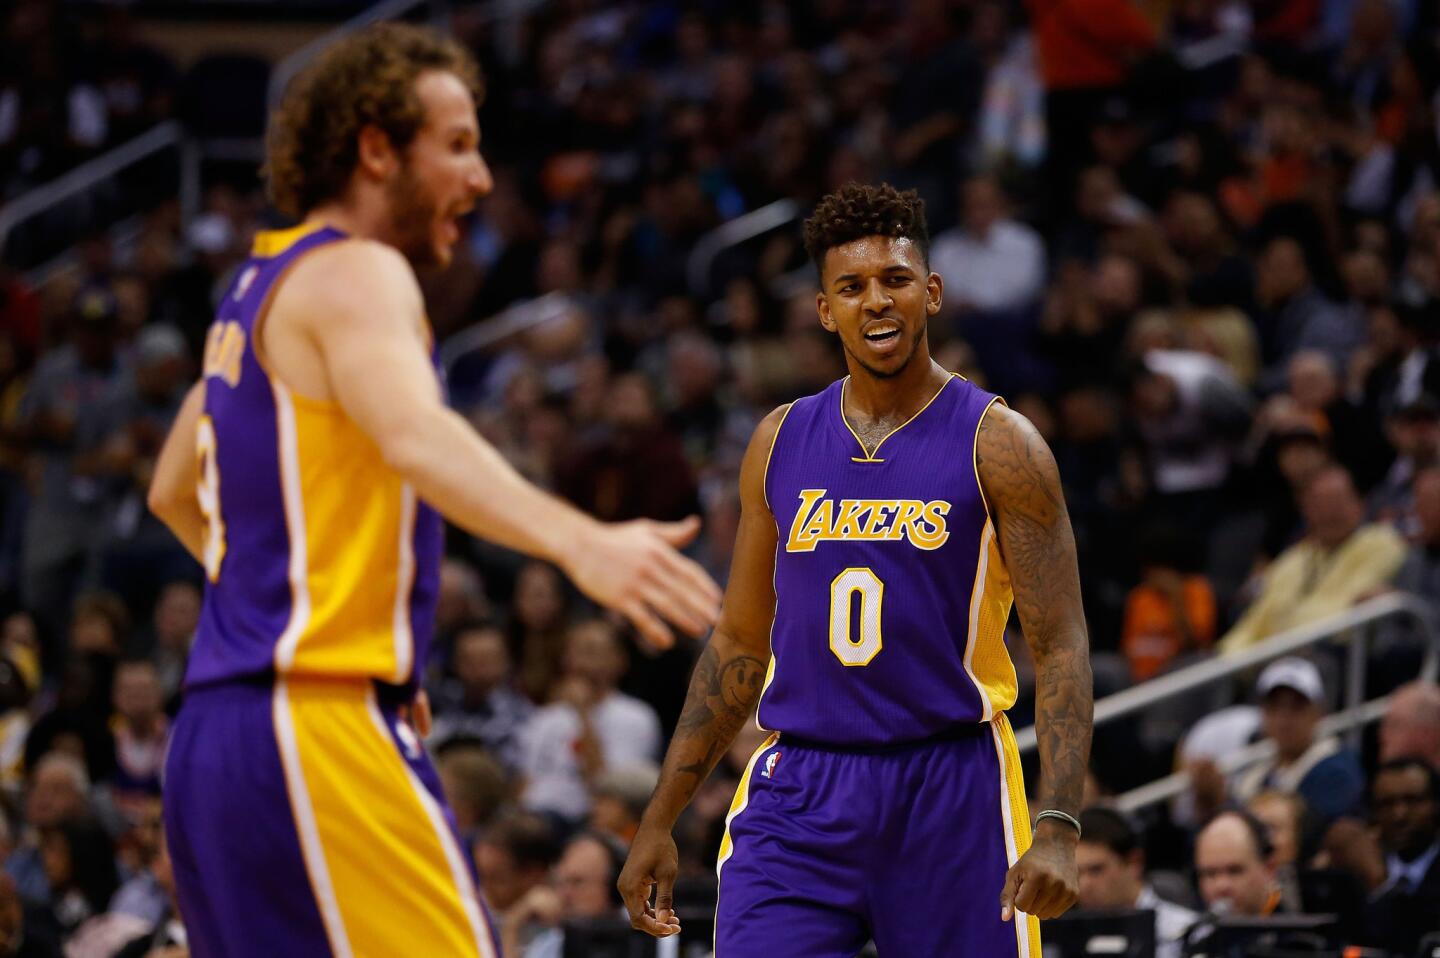 Lakers guard Nick Young reacts after teammate Marcelo Huertas scores against the Suns.